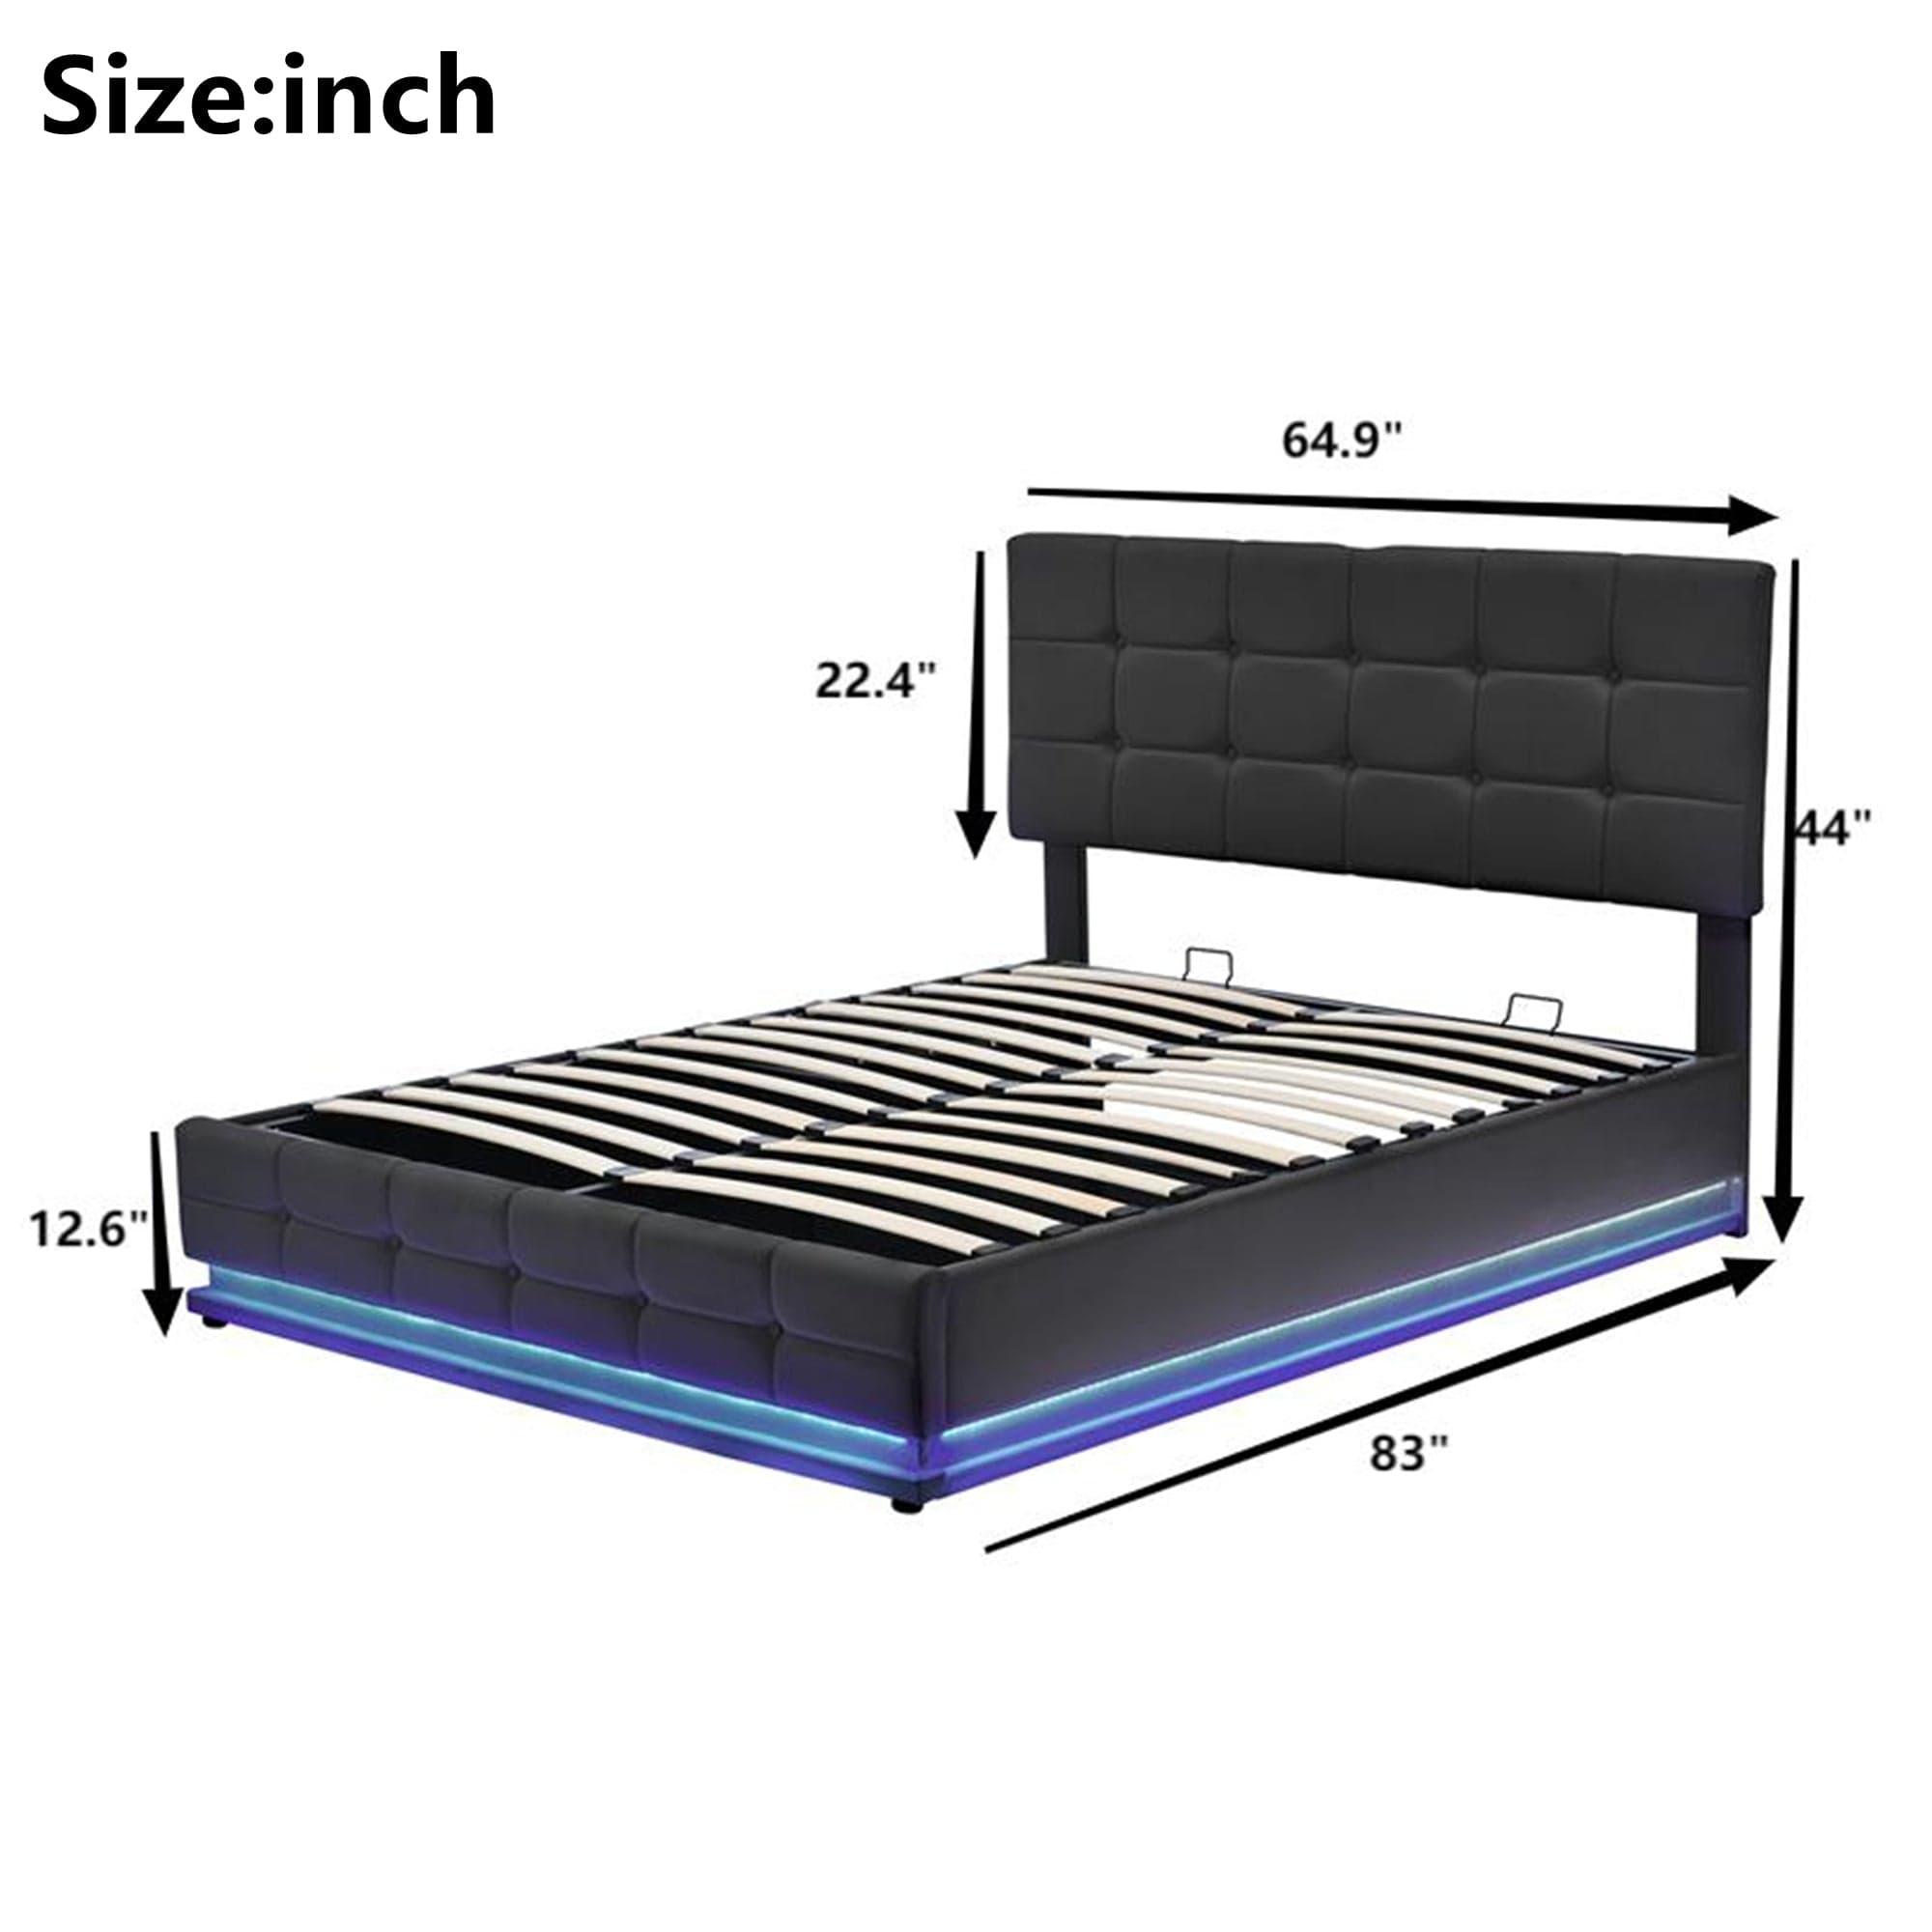 Shop Tufted Upholstered Platform Bed with Hydraulic Storage System,Queen Size PU Storage Bed with LED Lights and USB charger, Black Mademoiselle Home Decor